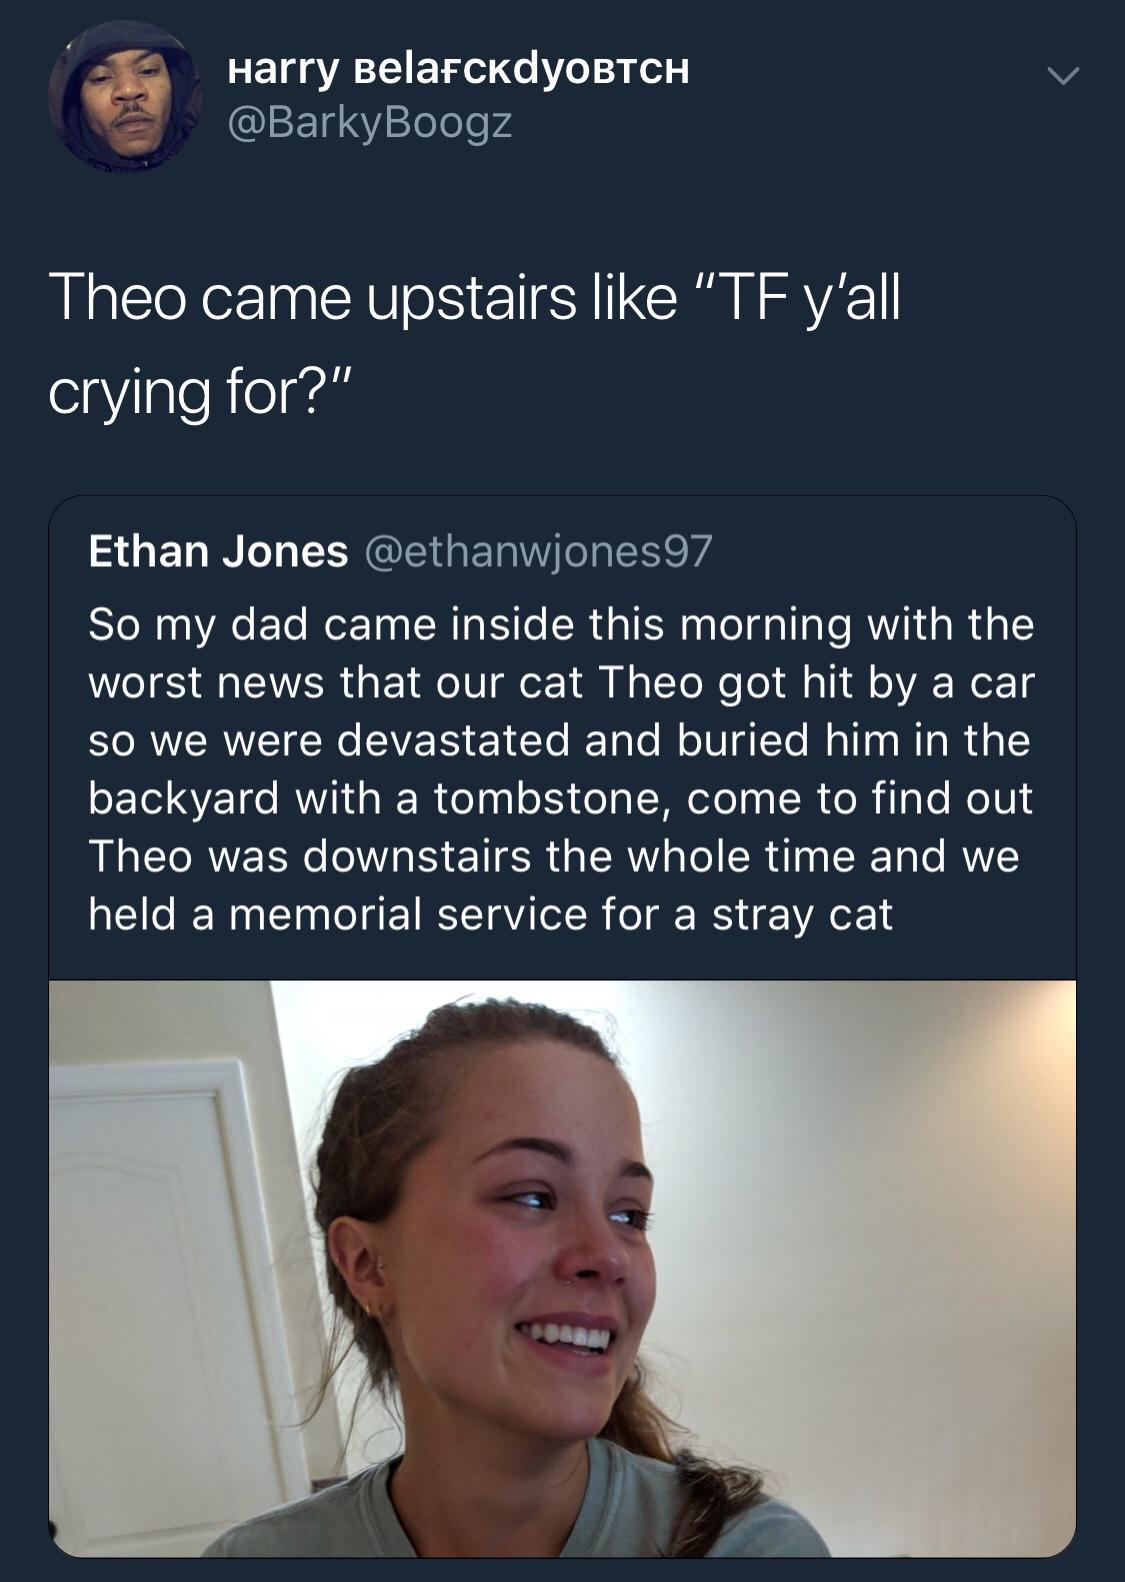 presentation - Harry BelafcKdYOBTCH Theo came upstairs "Tf y'all crying for?" Ethan Jones So my dad came inside this morning with the worst news that our cat Theo got hit by a car so we were devastated and buried him in the backyard with a tombstone, come